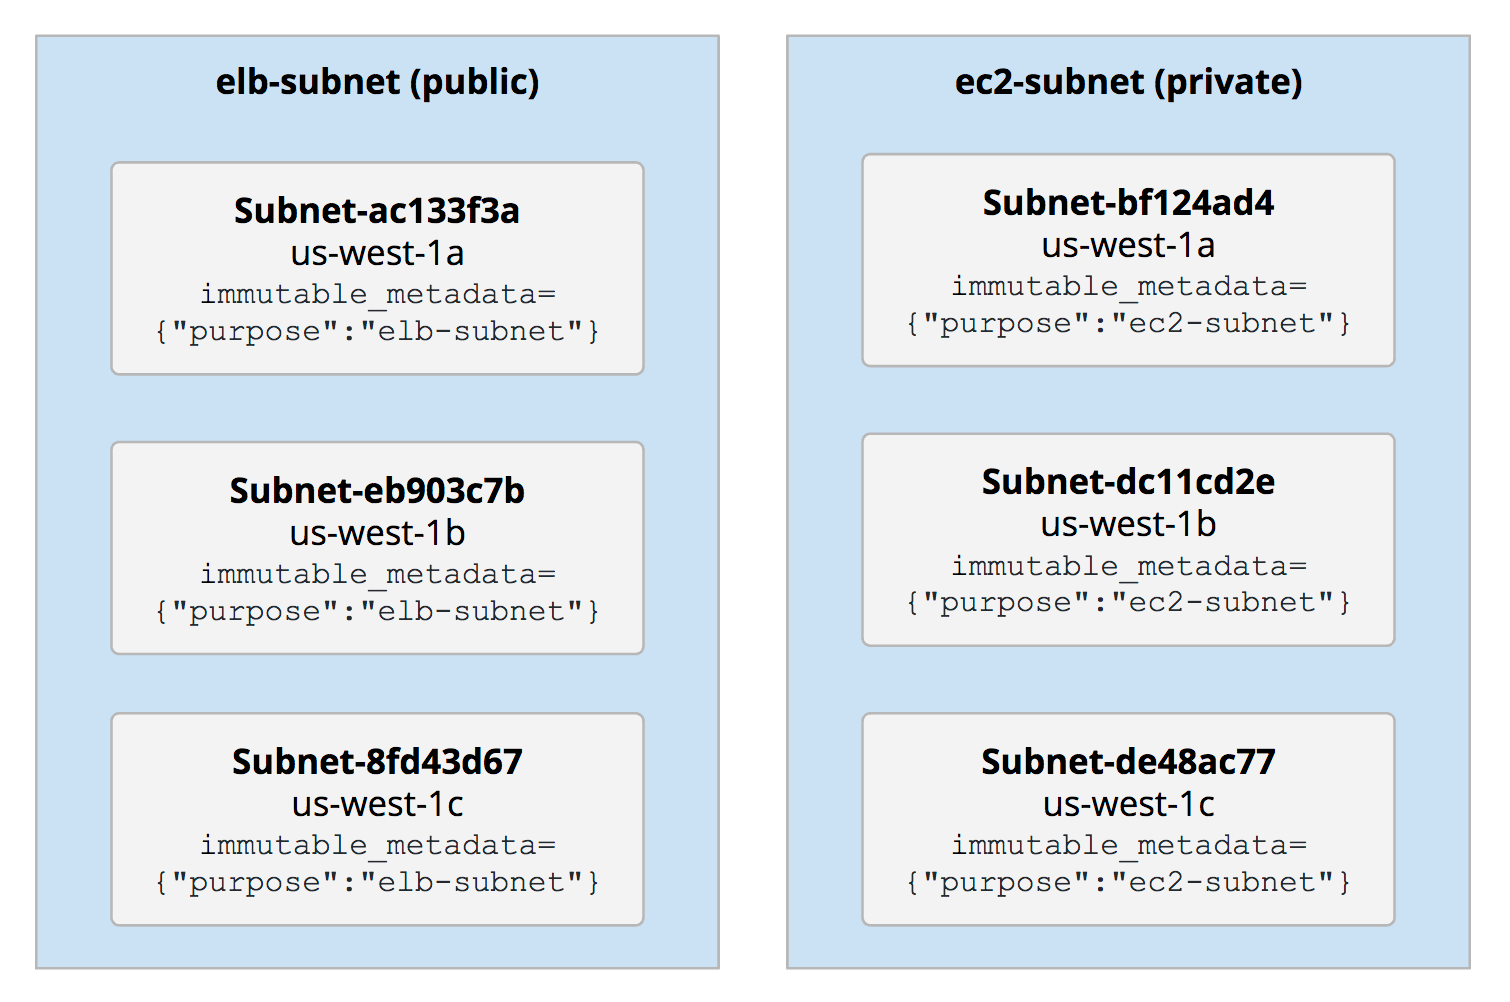 subnets groups